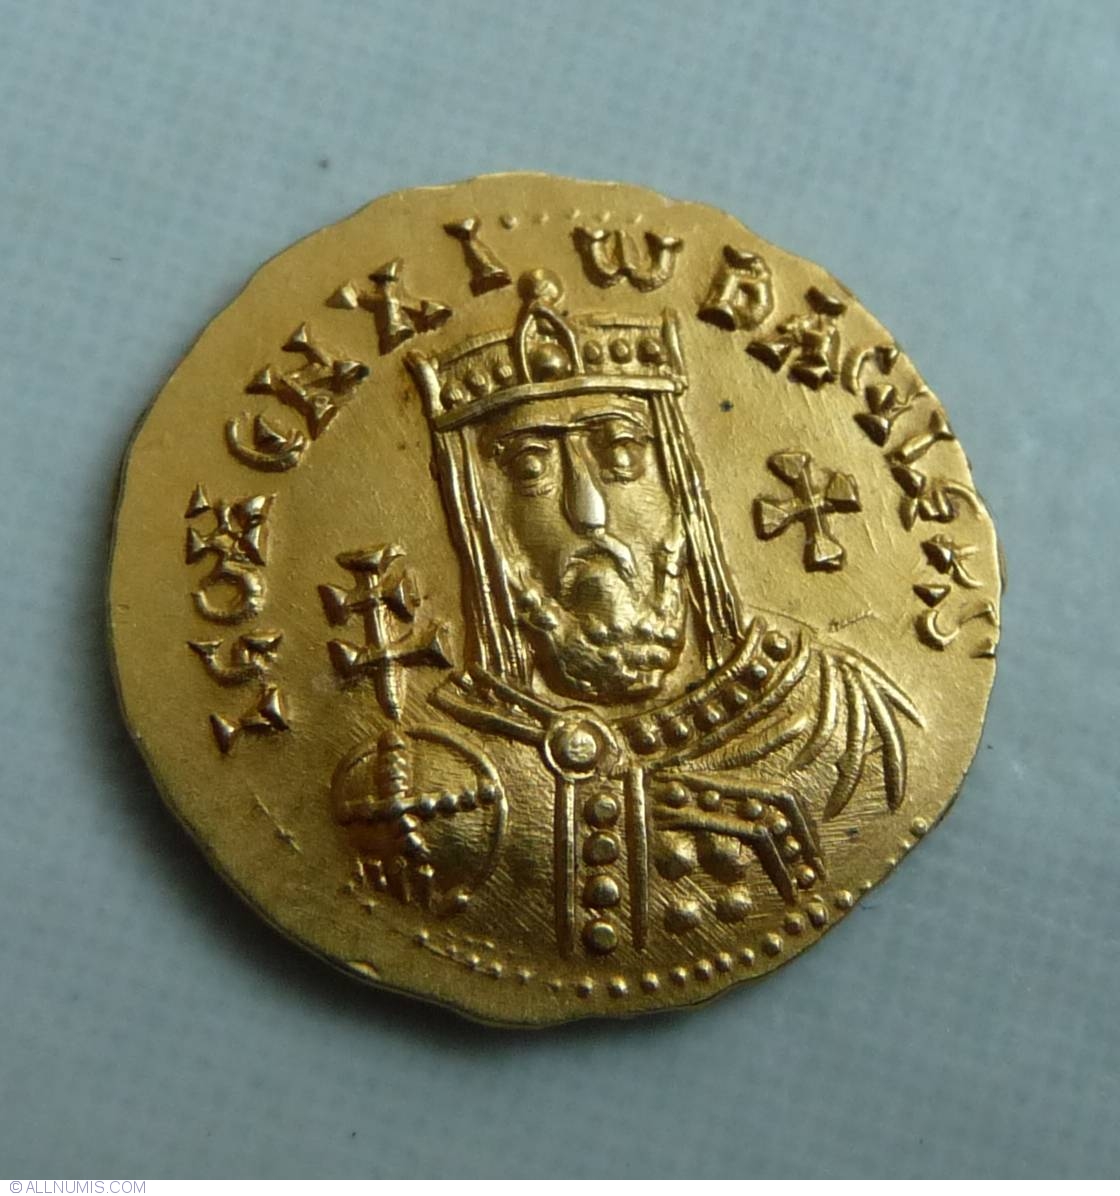 Dating byzantine coins